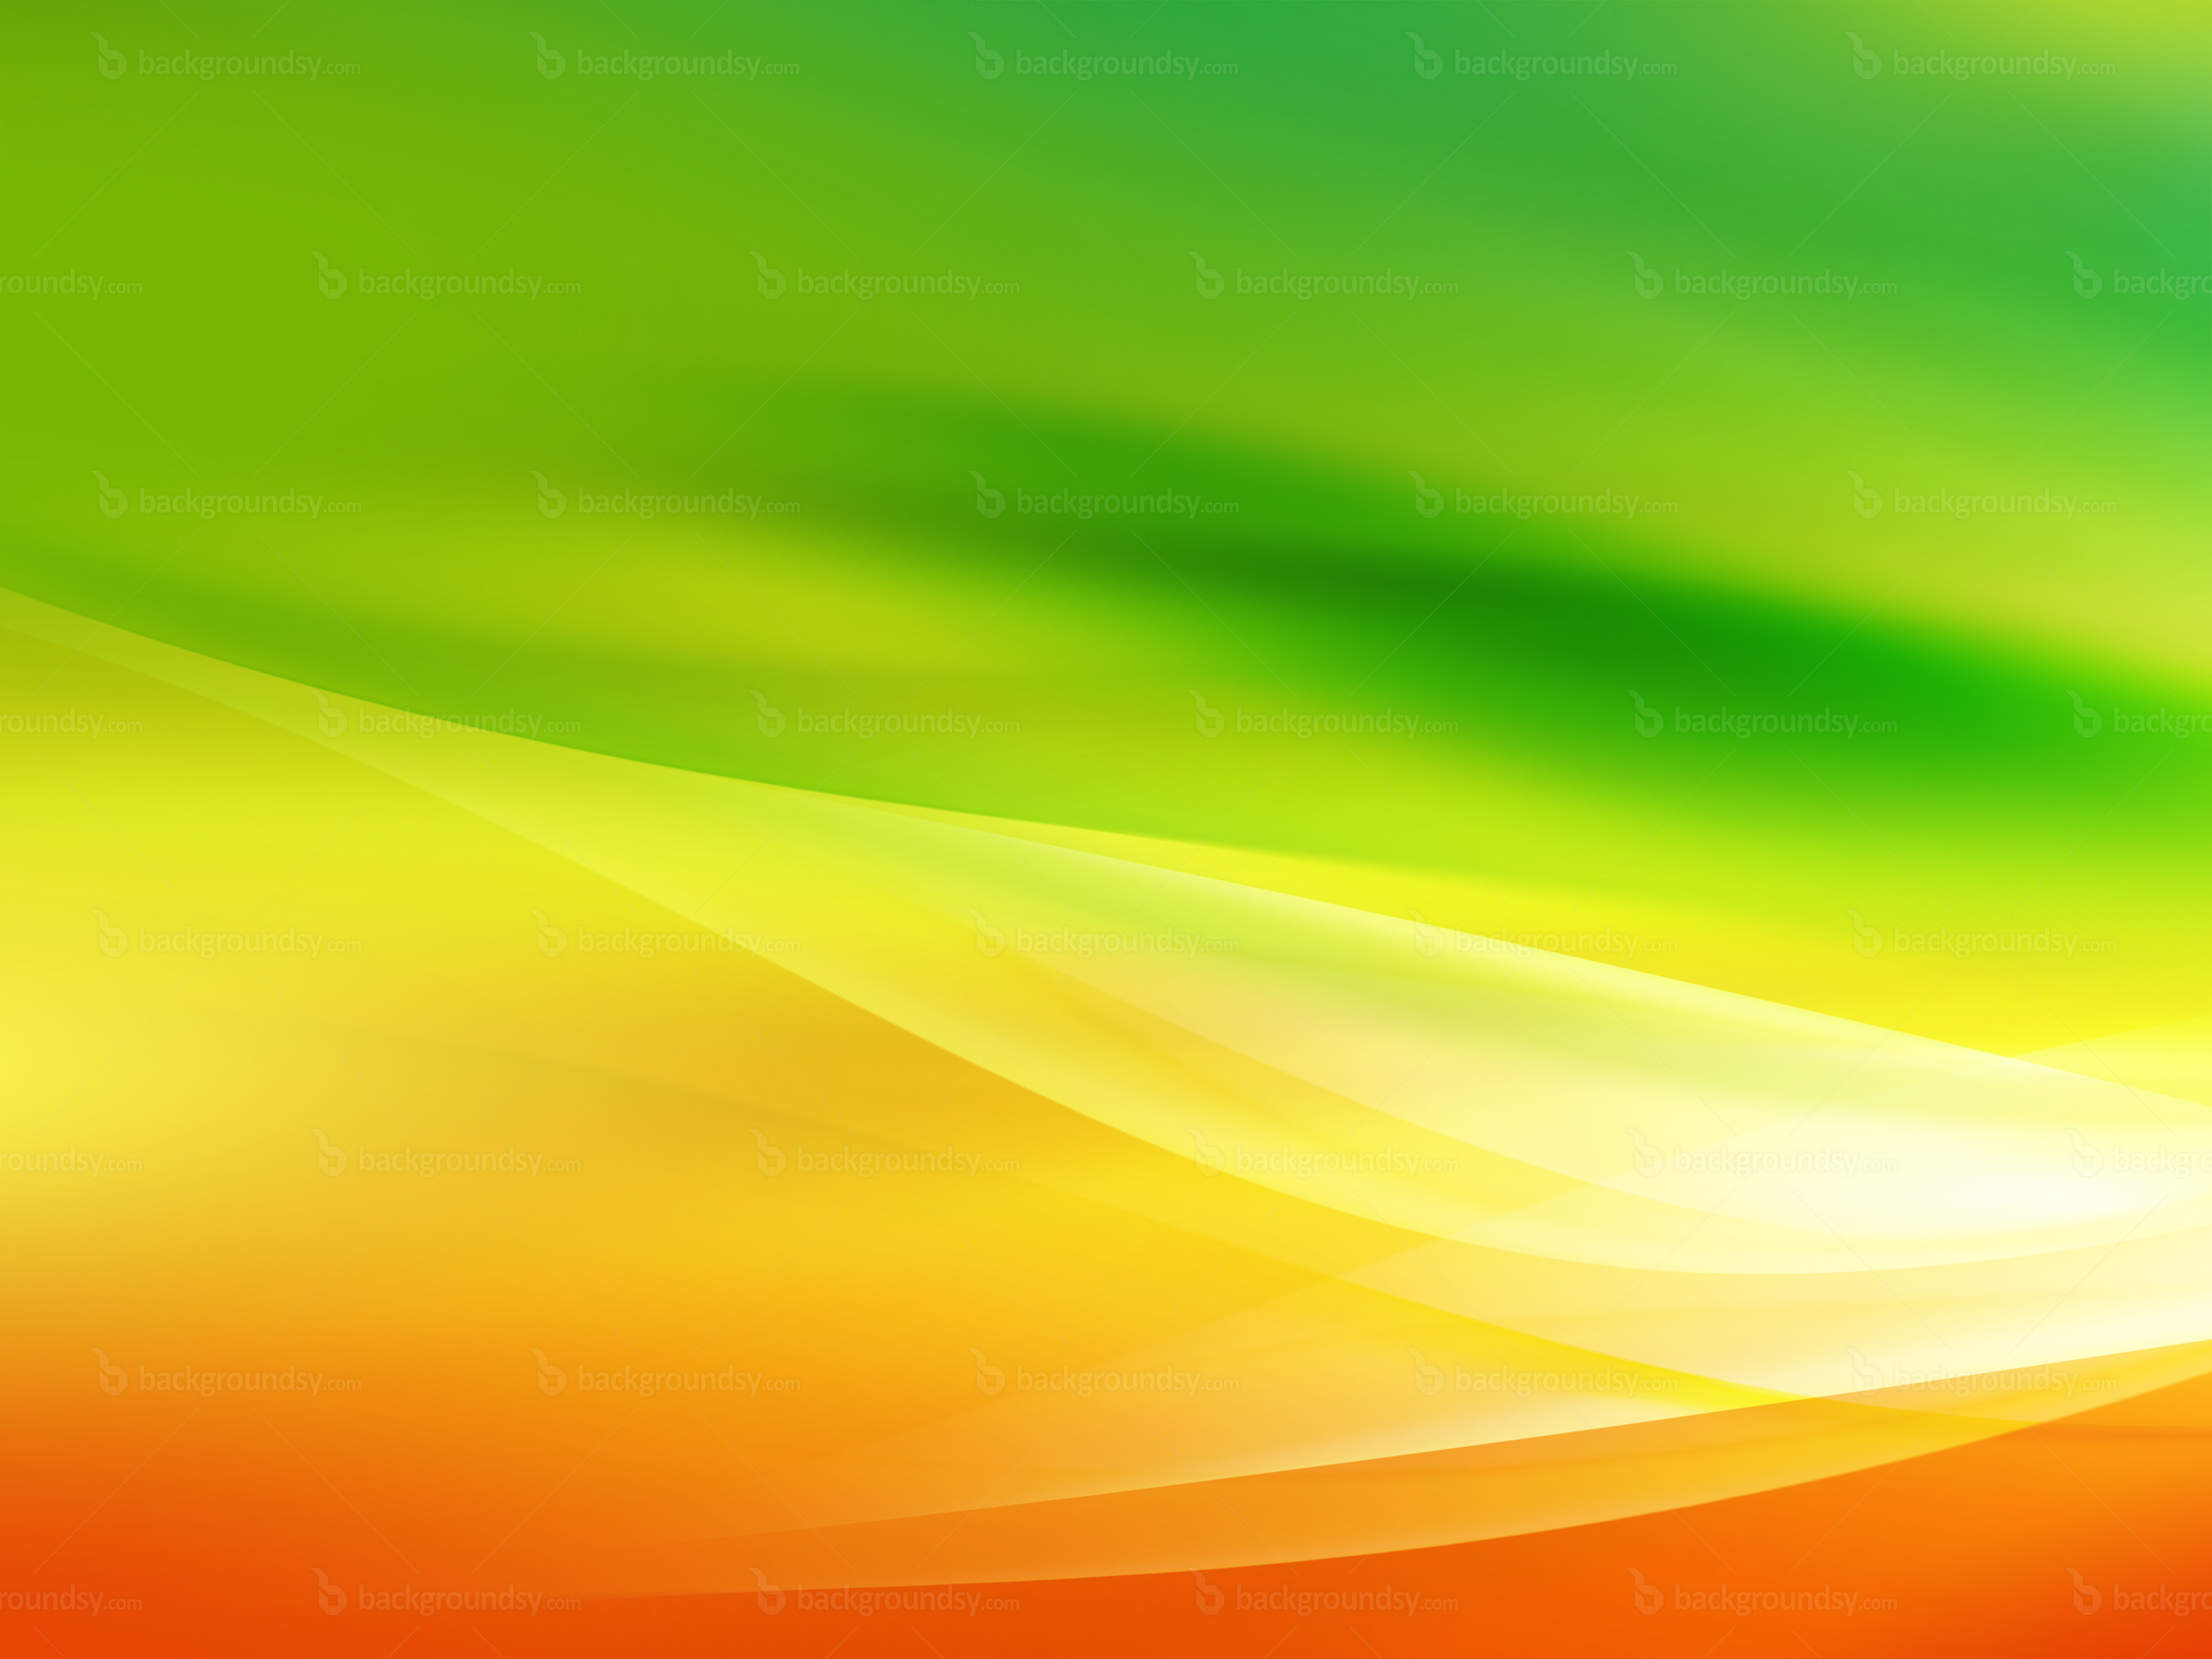 Green and Orange Wallpapers - 4k, HD Green and Orange Backgrounds on ...